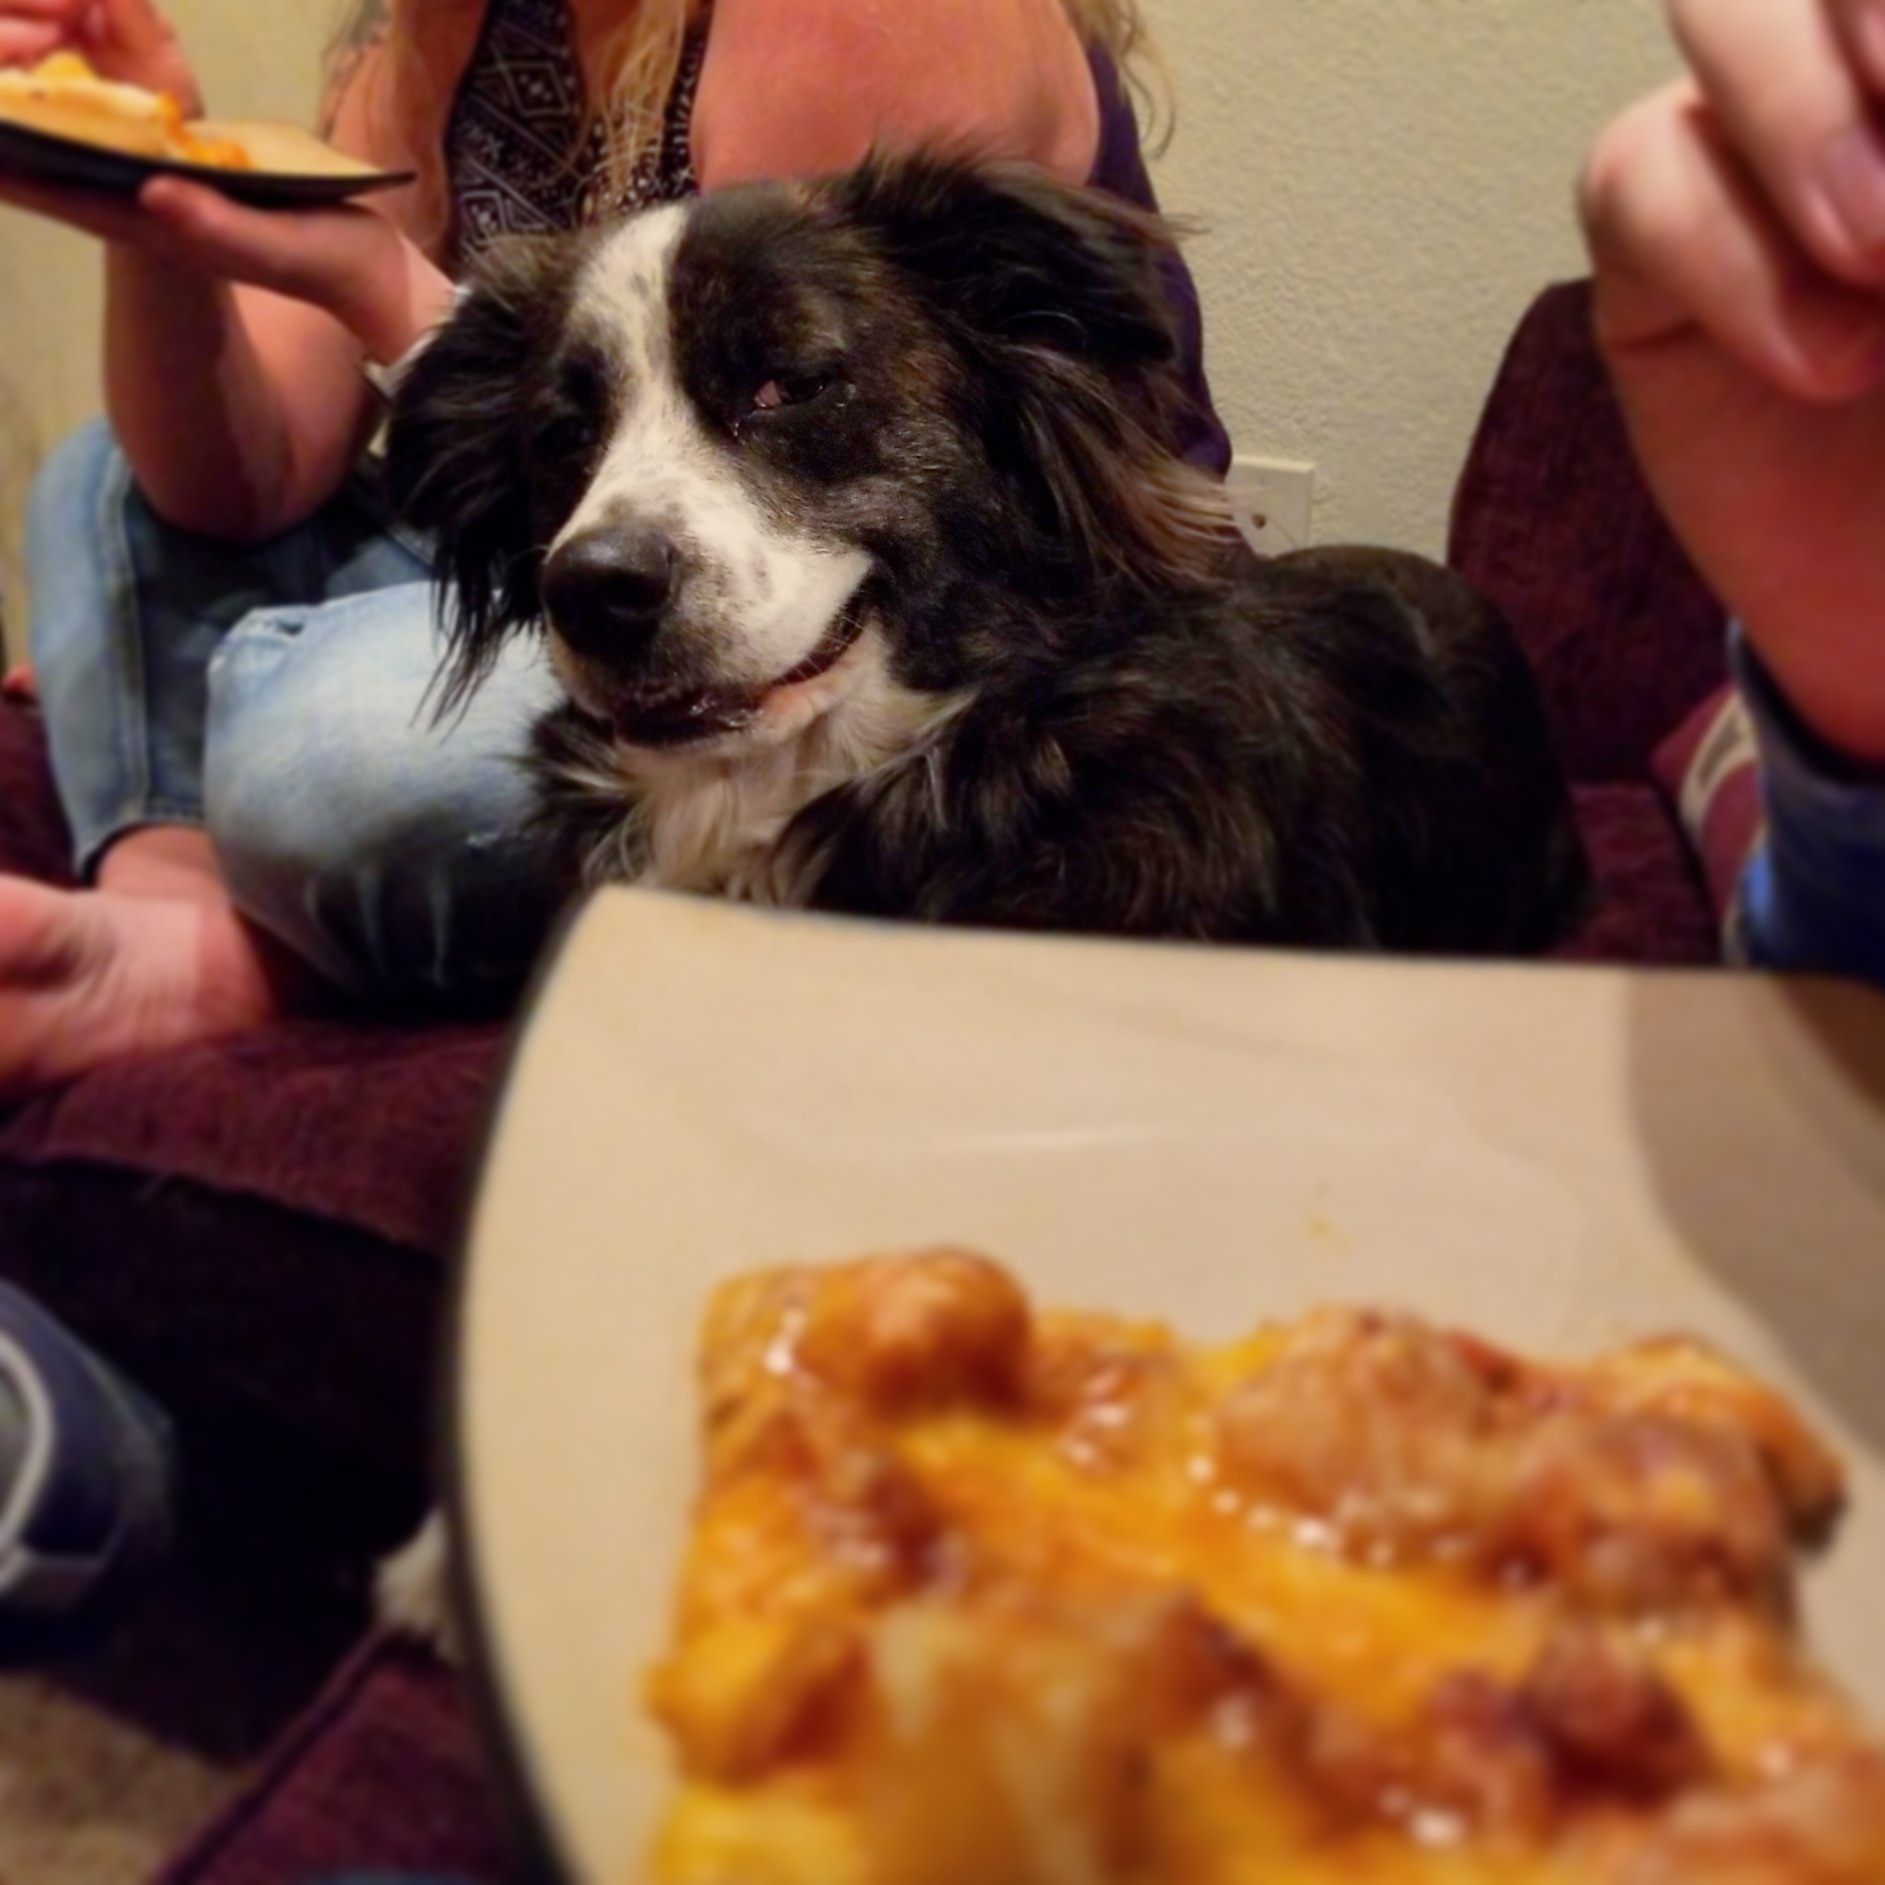 Find yourself someone who looks at you like this dog looks at pizza.